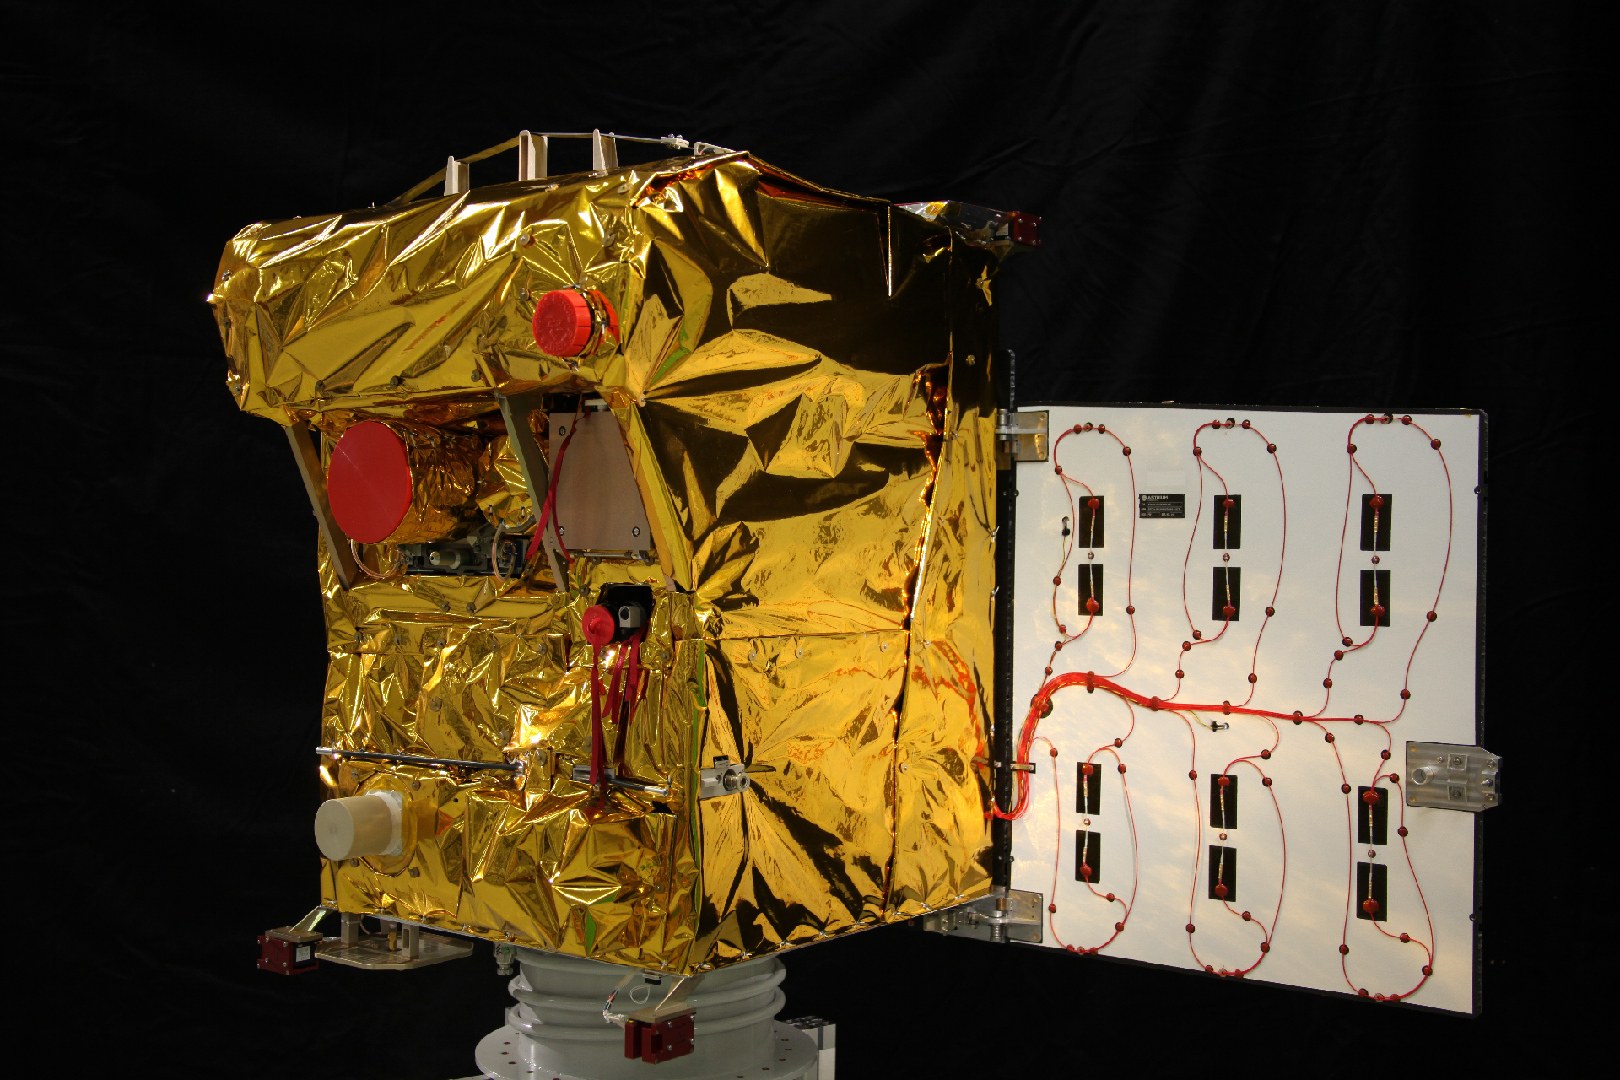 The small satellite BIROS (Bi-spectral InfraRed Optical System)